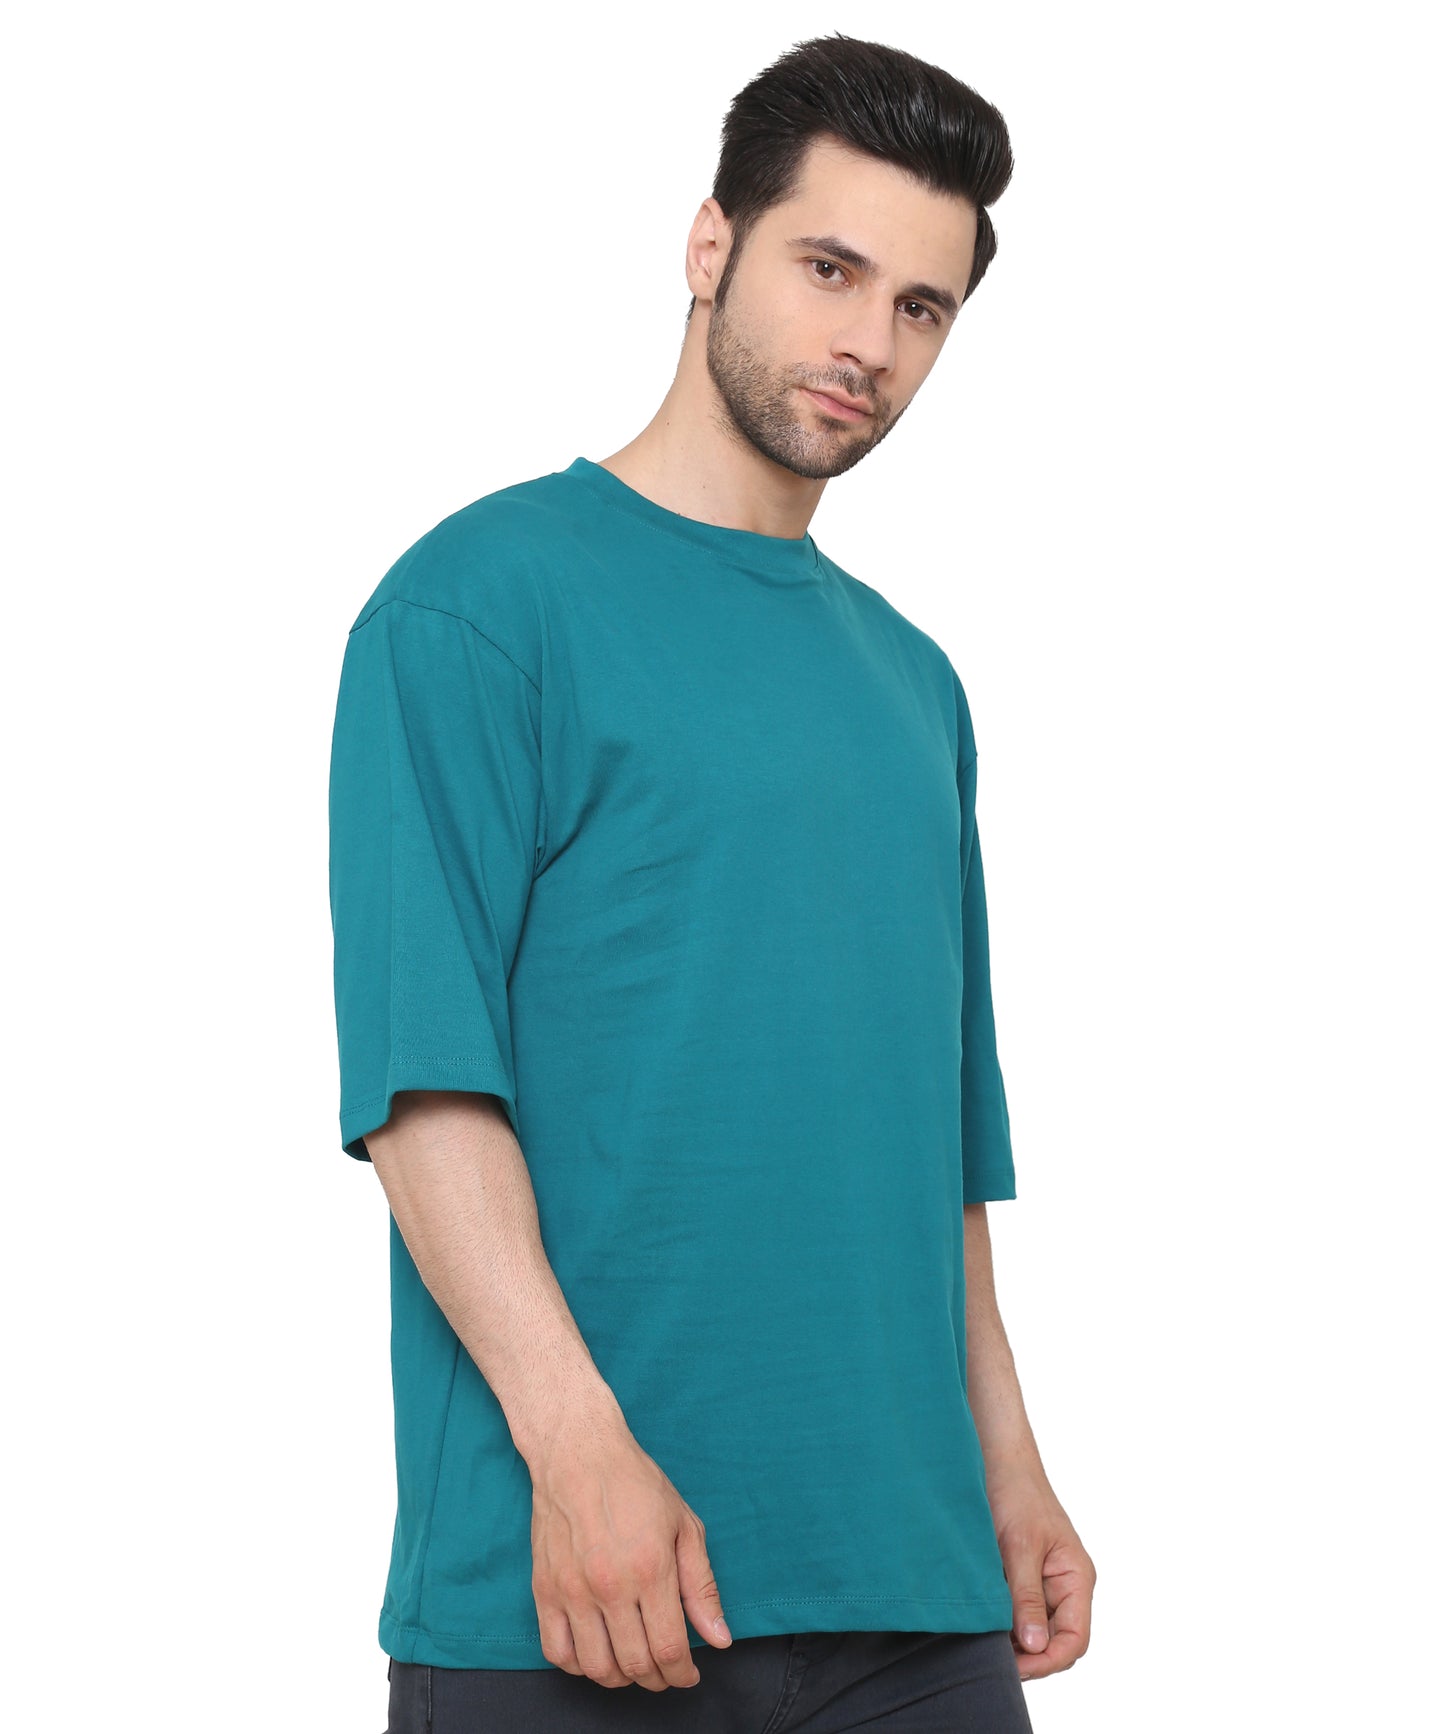 Ocean Oversized Cotton T-shirts Relaxed Fit Tees for Men